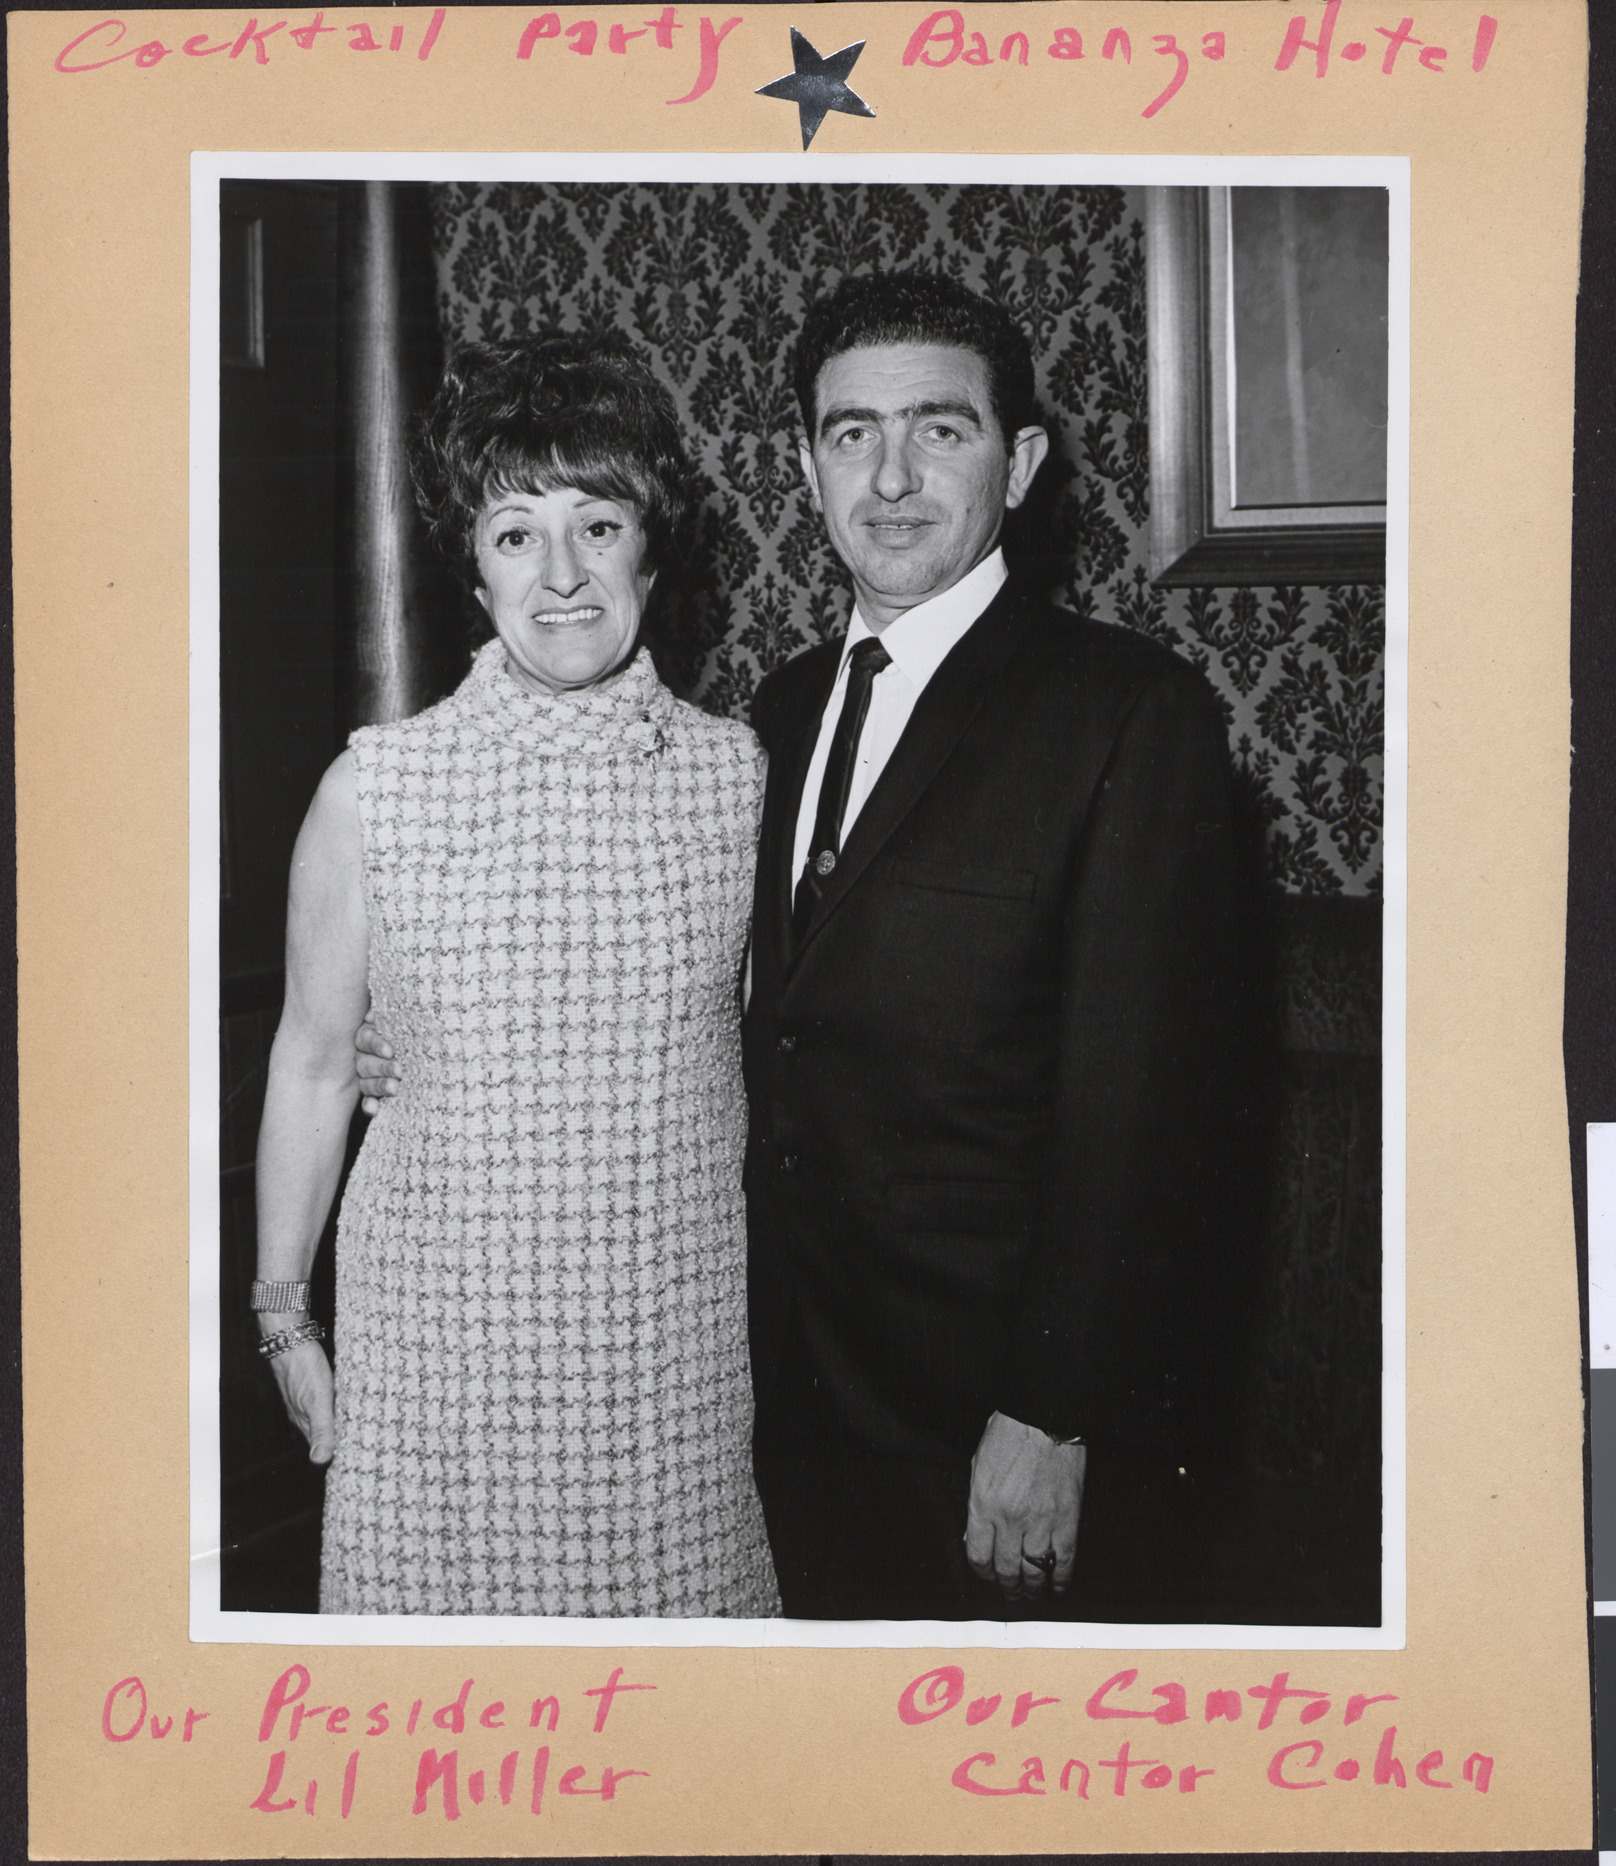 Cocktail Party, Bonanza Hotel: Photograph of Lillian Miller and Cantor Cohen